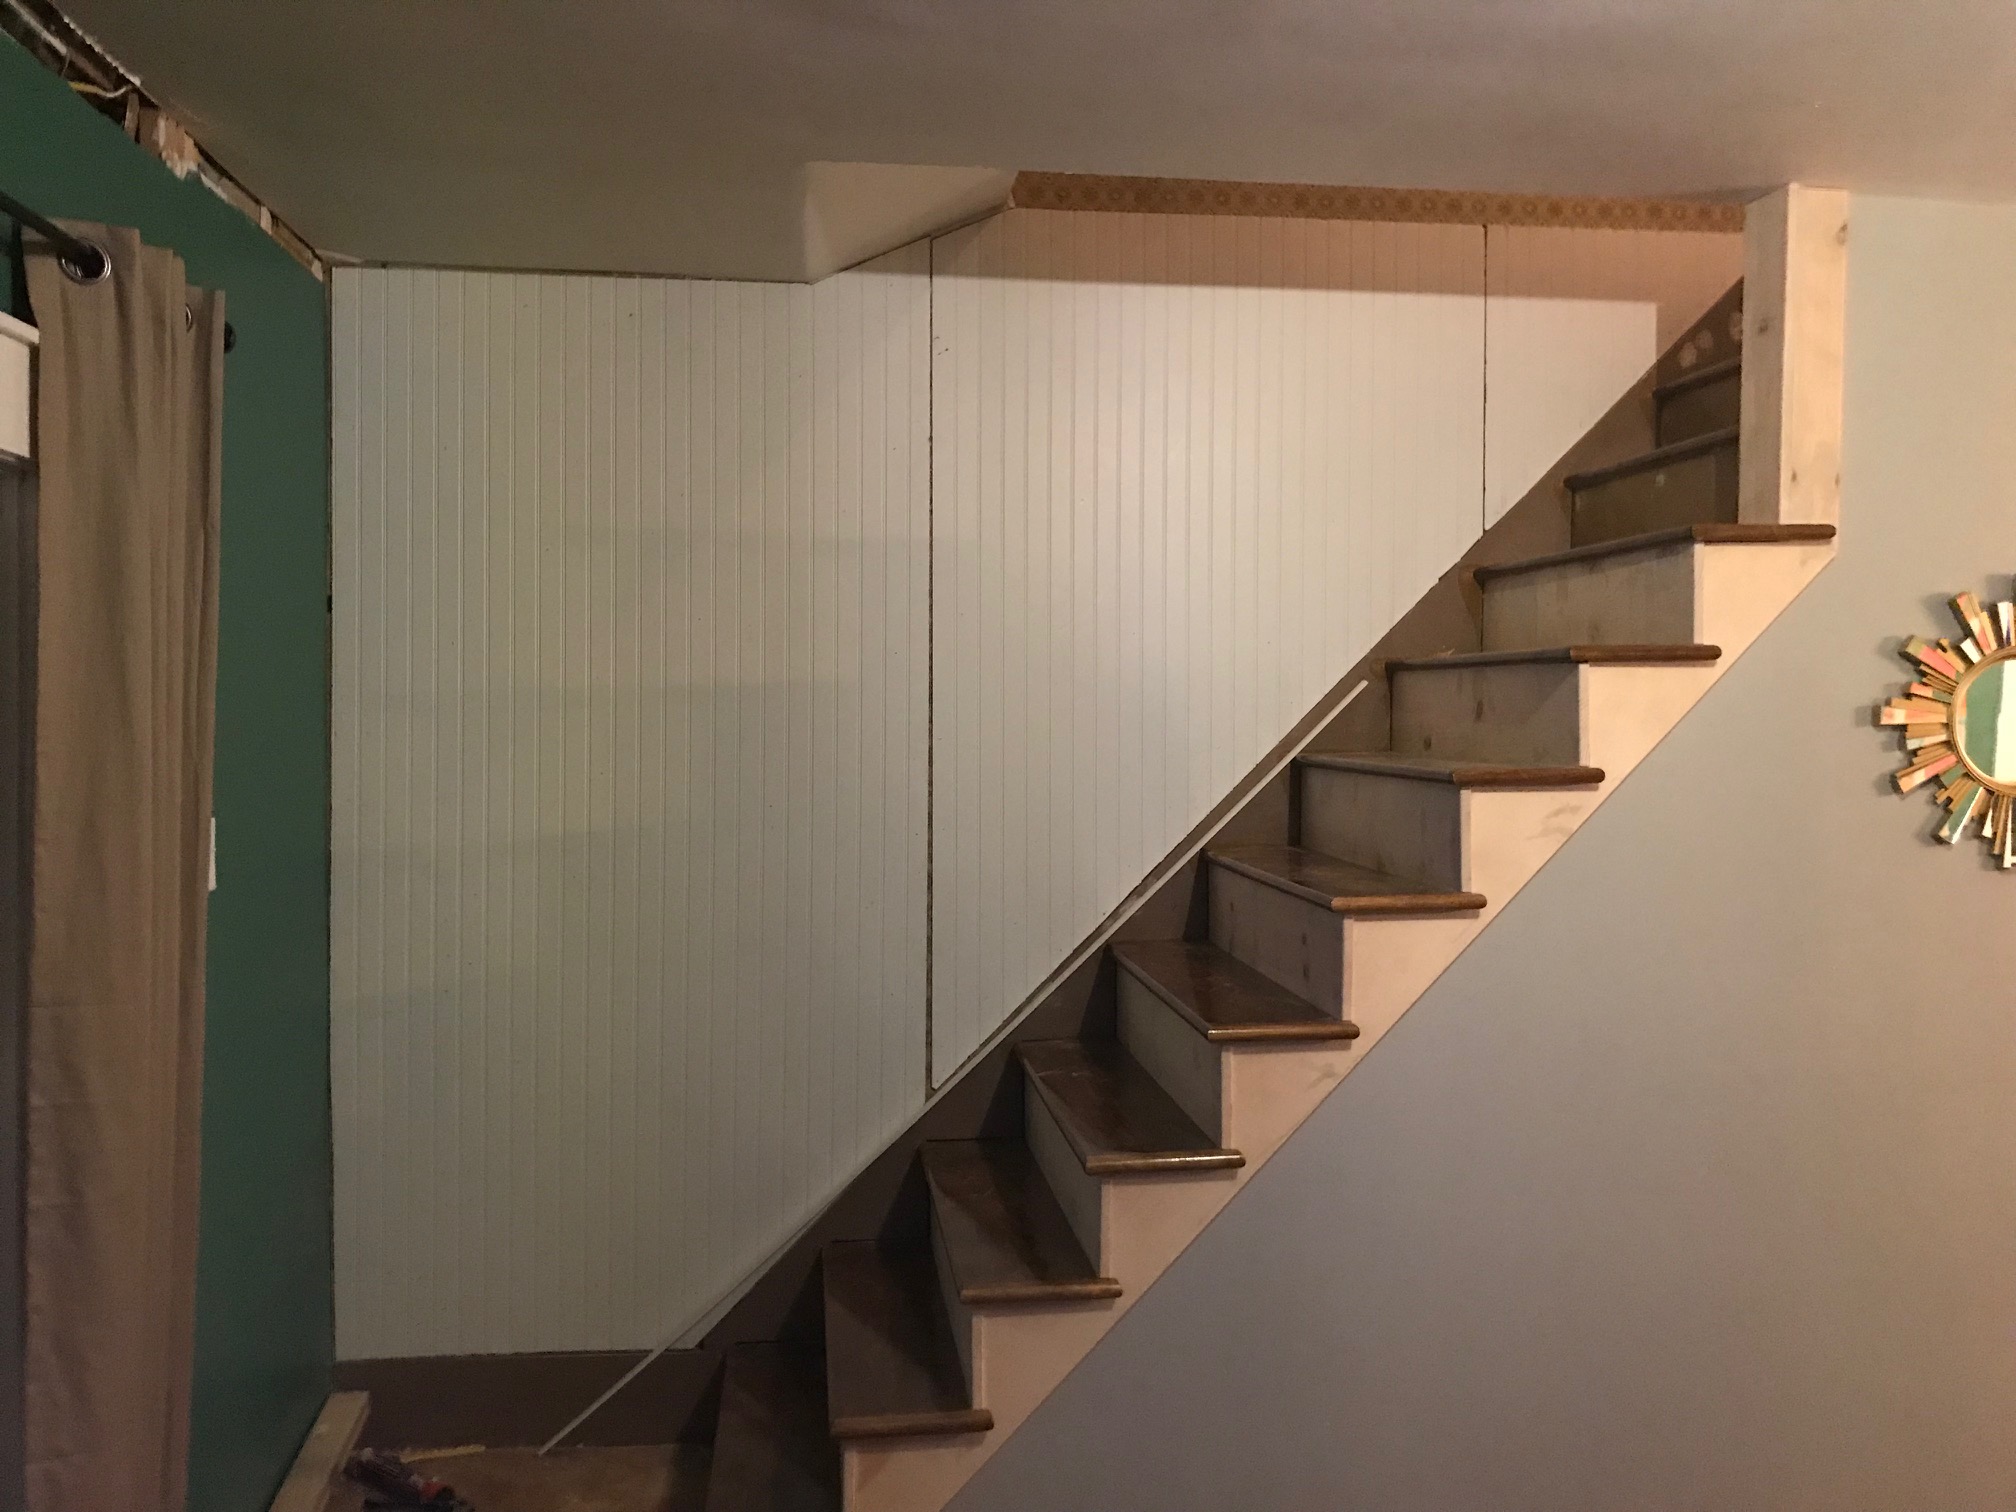 Installing the stair treads, risers, and skirtboard.